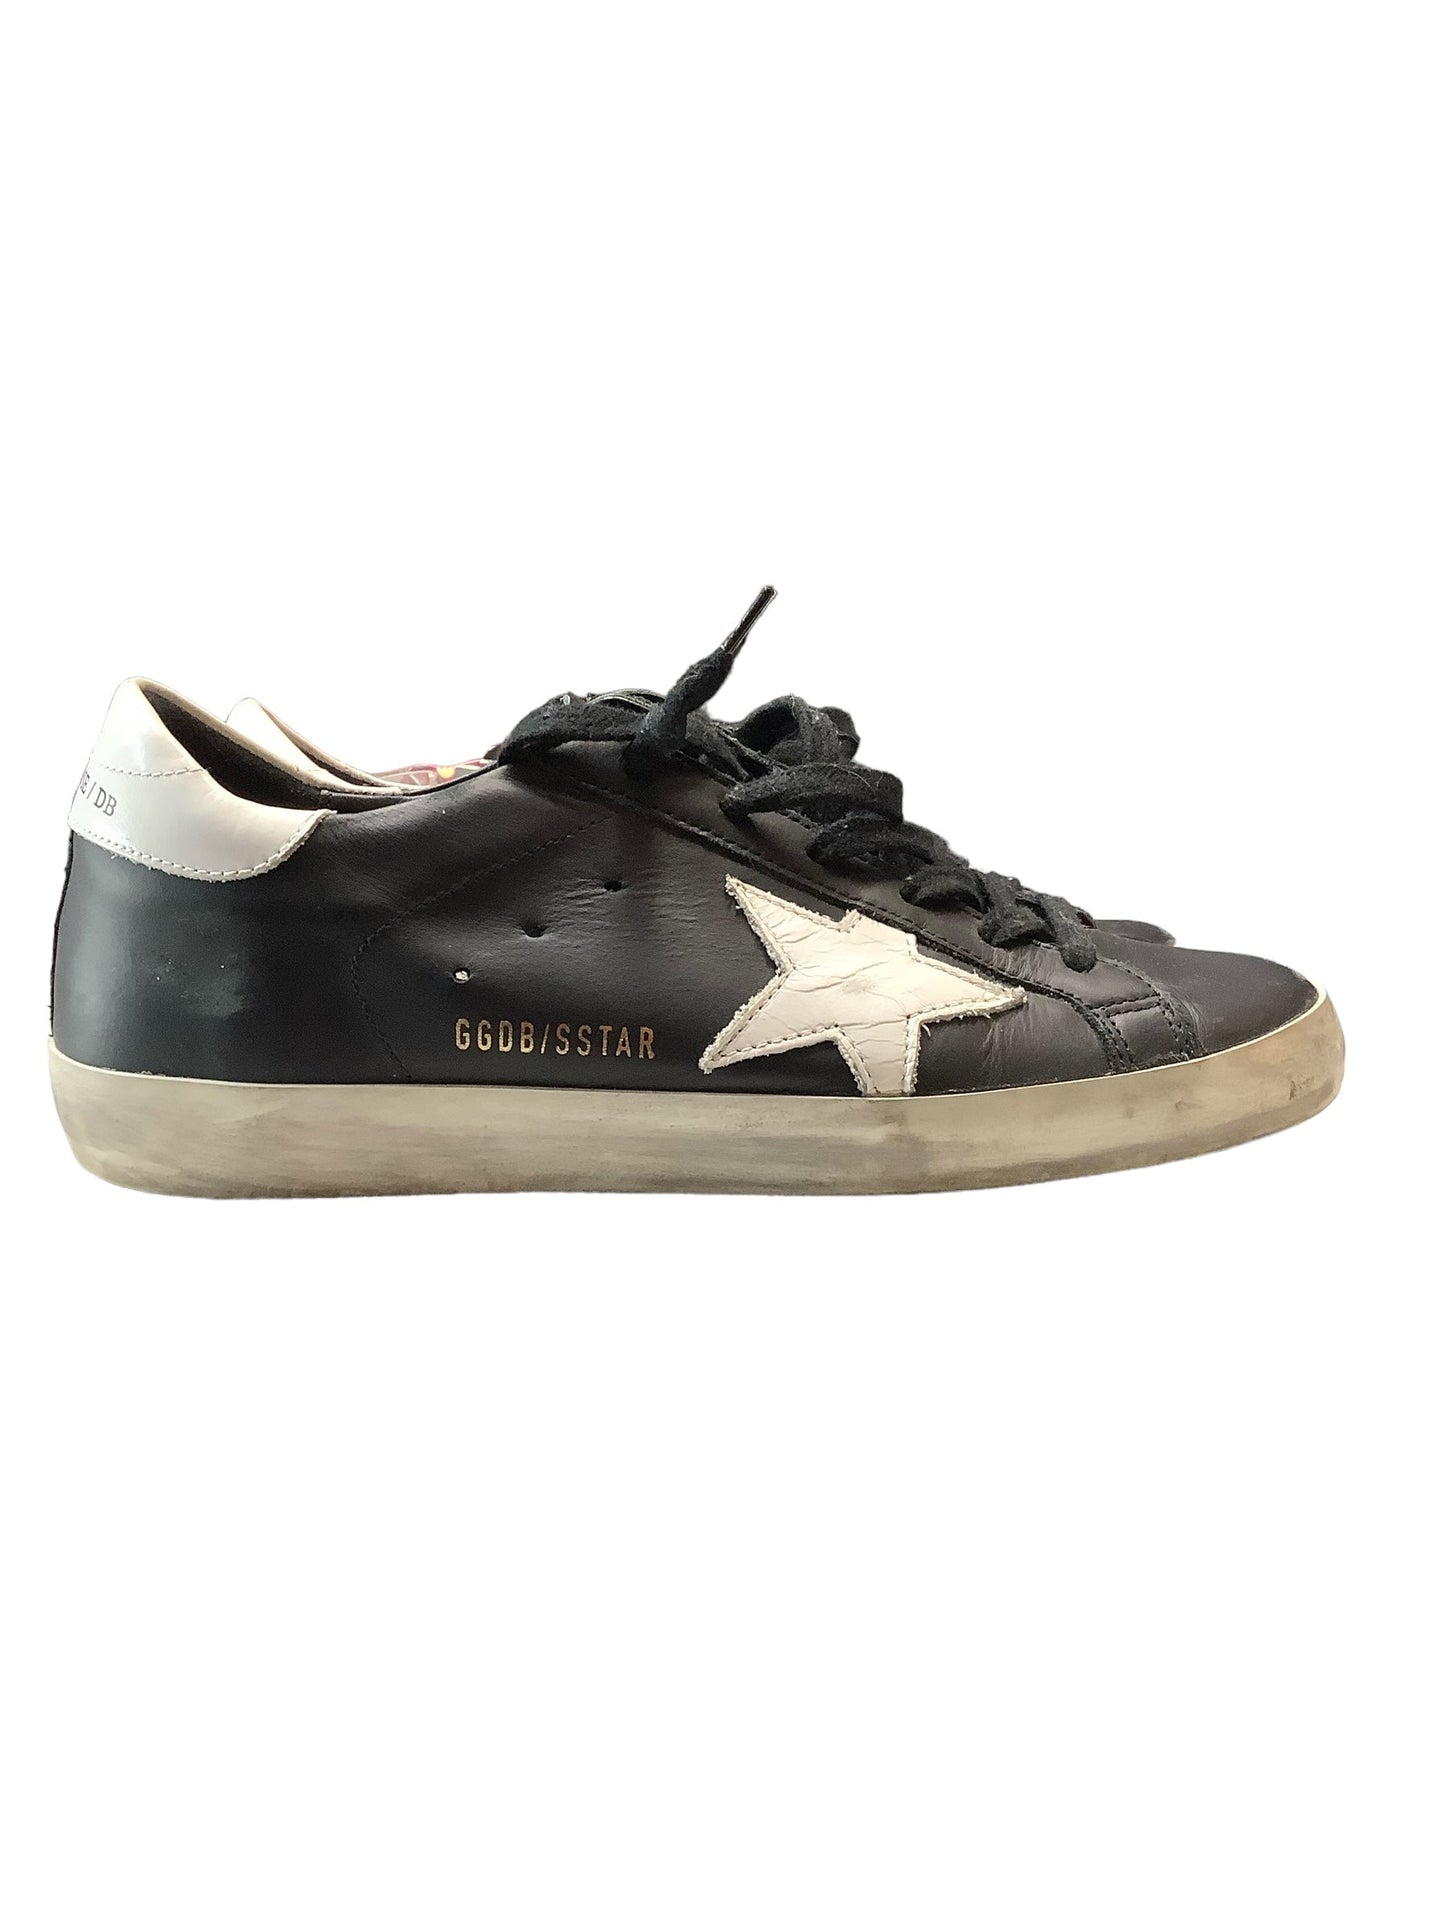 Shoes Athletic By Golden Goose  Size: 7.5/38